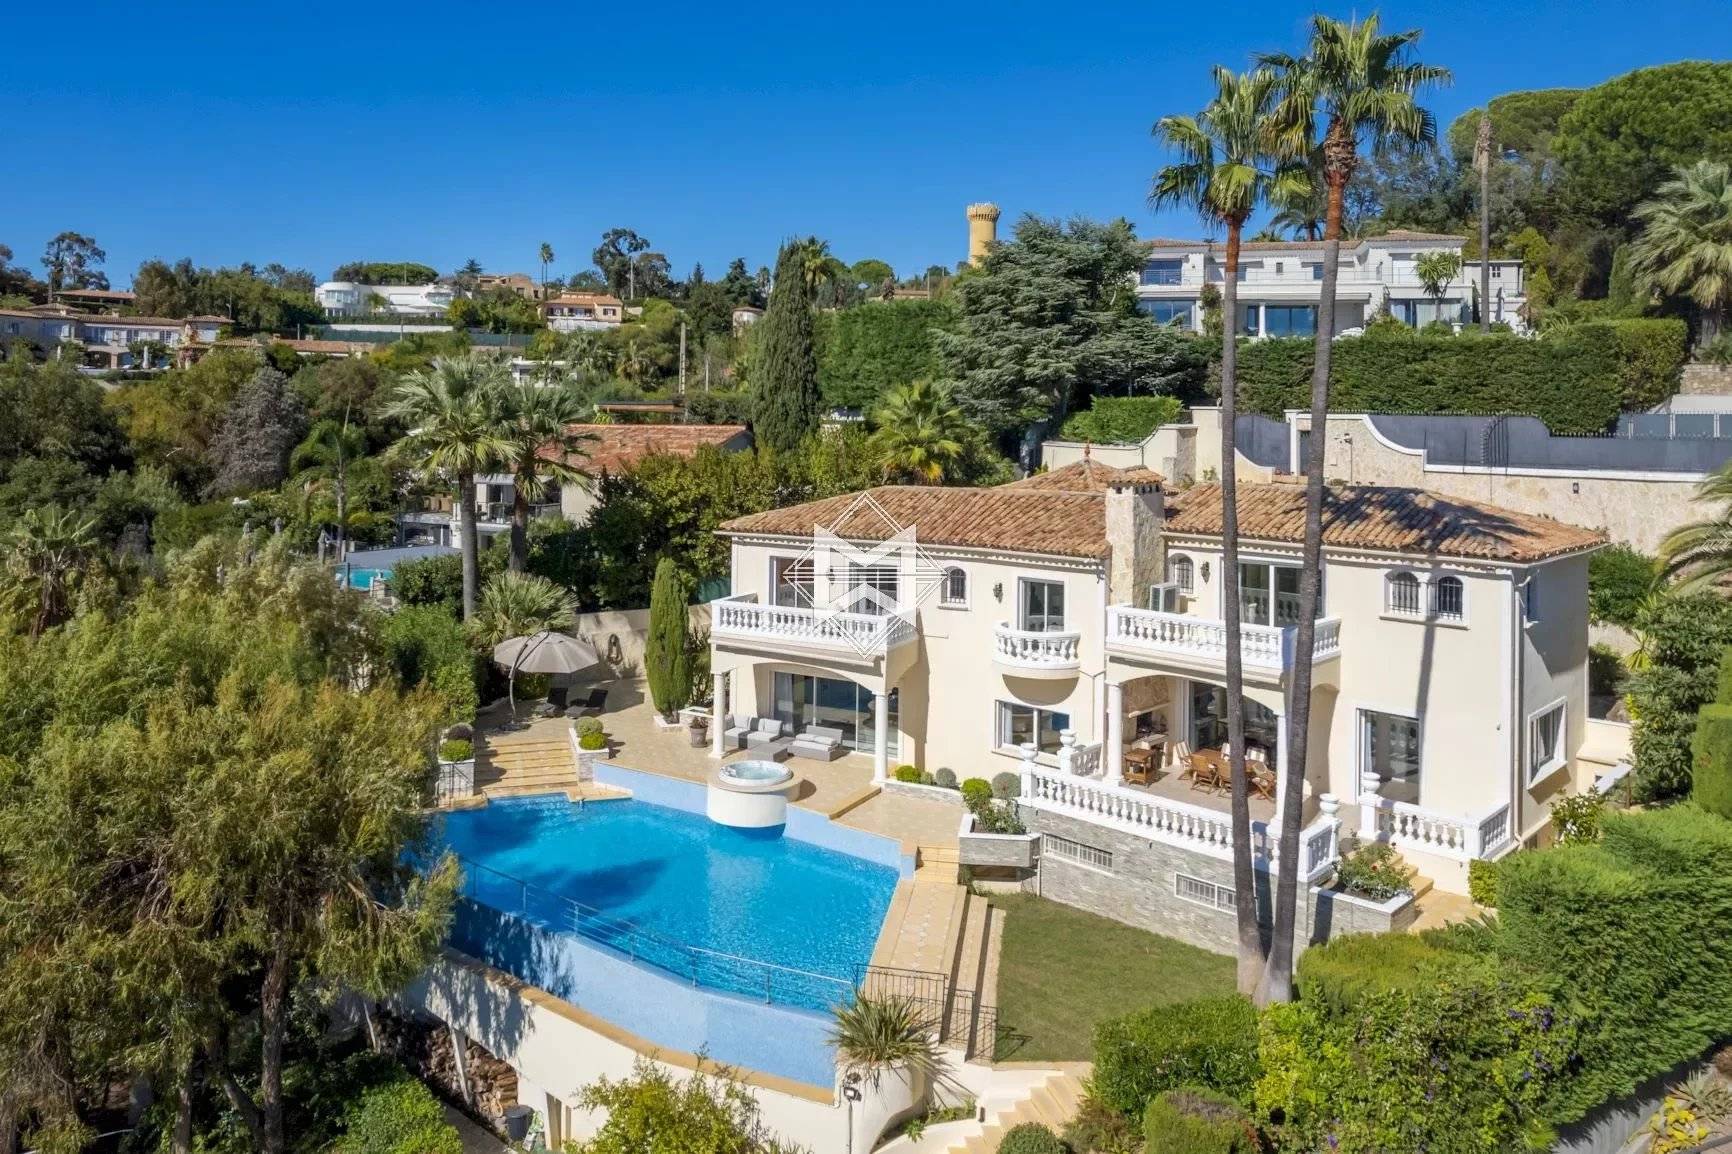 Super Cannes amazing villa with view